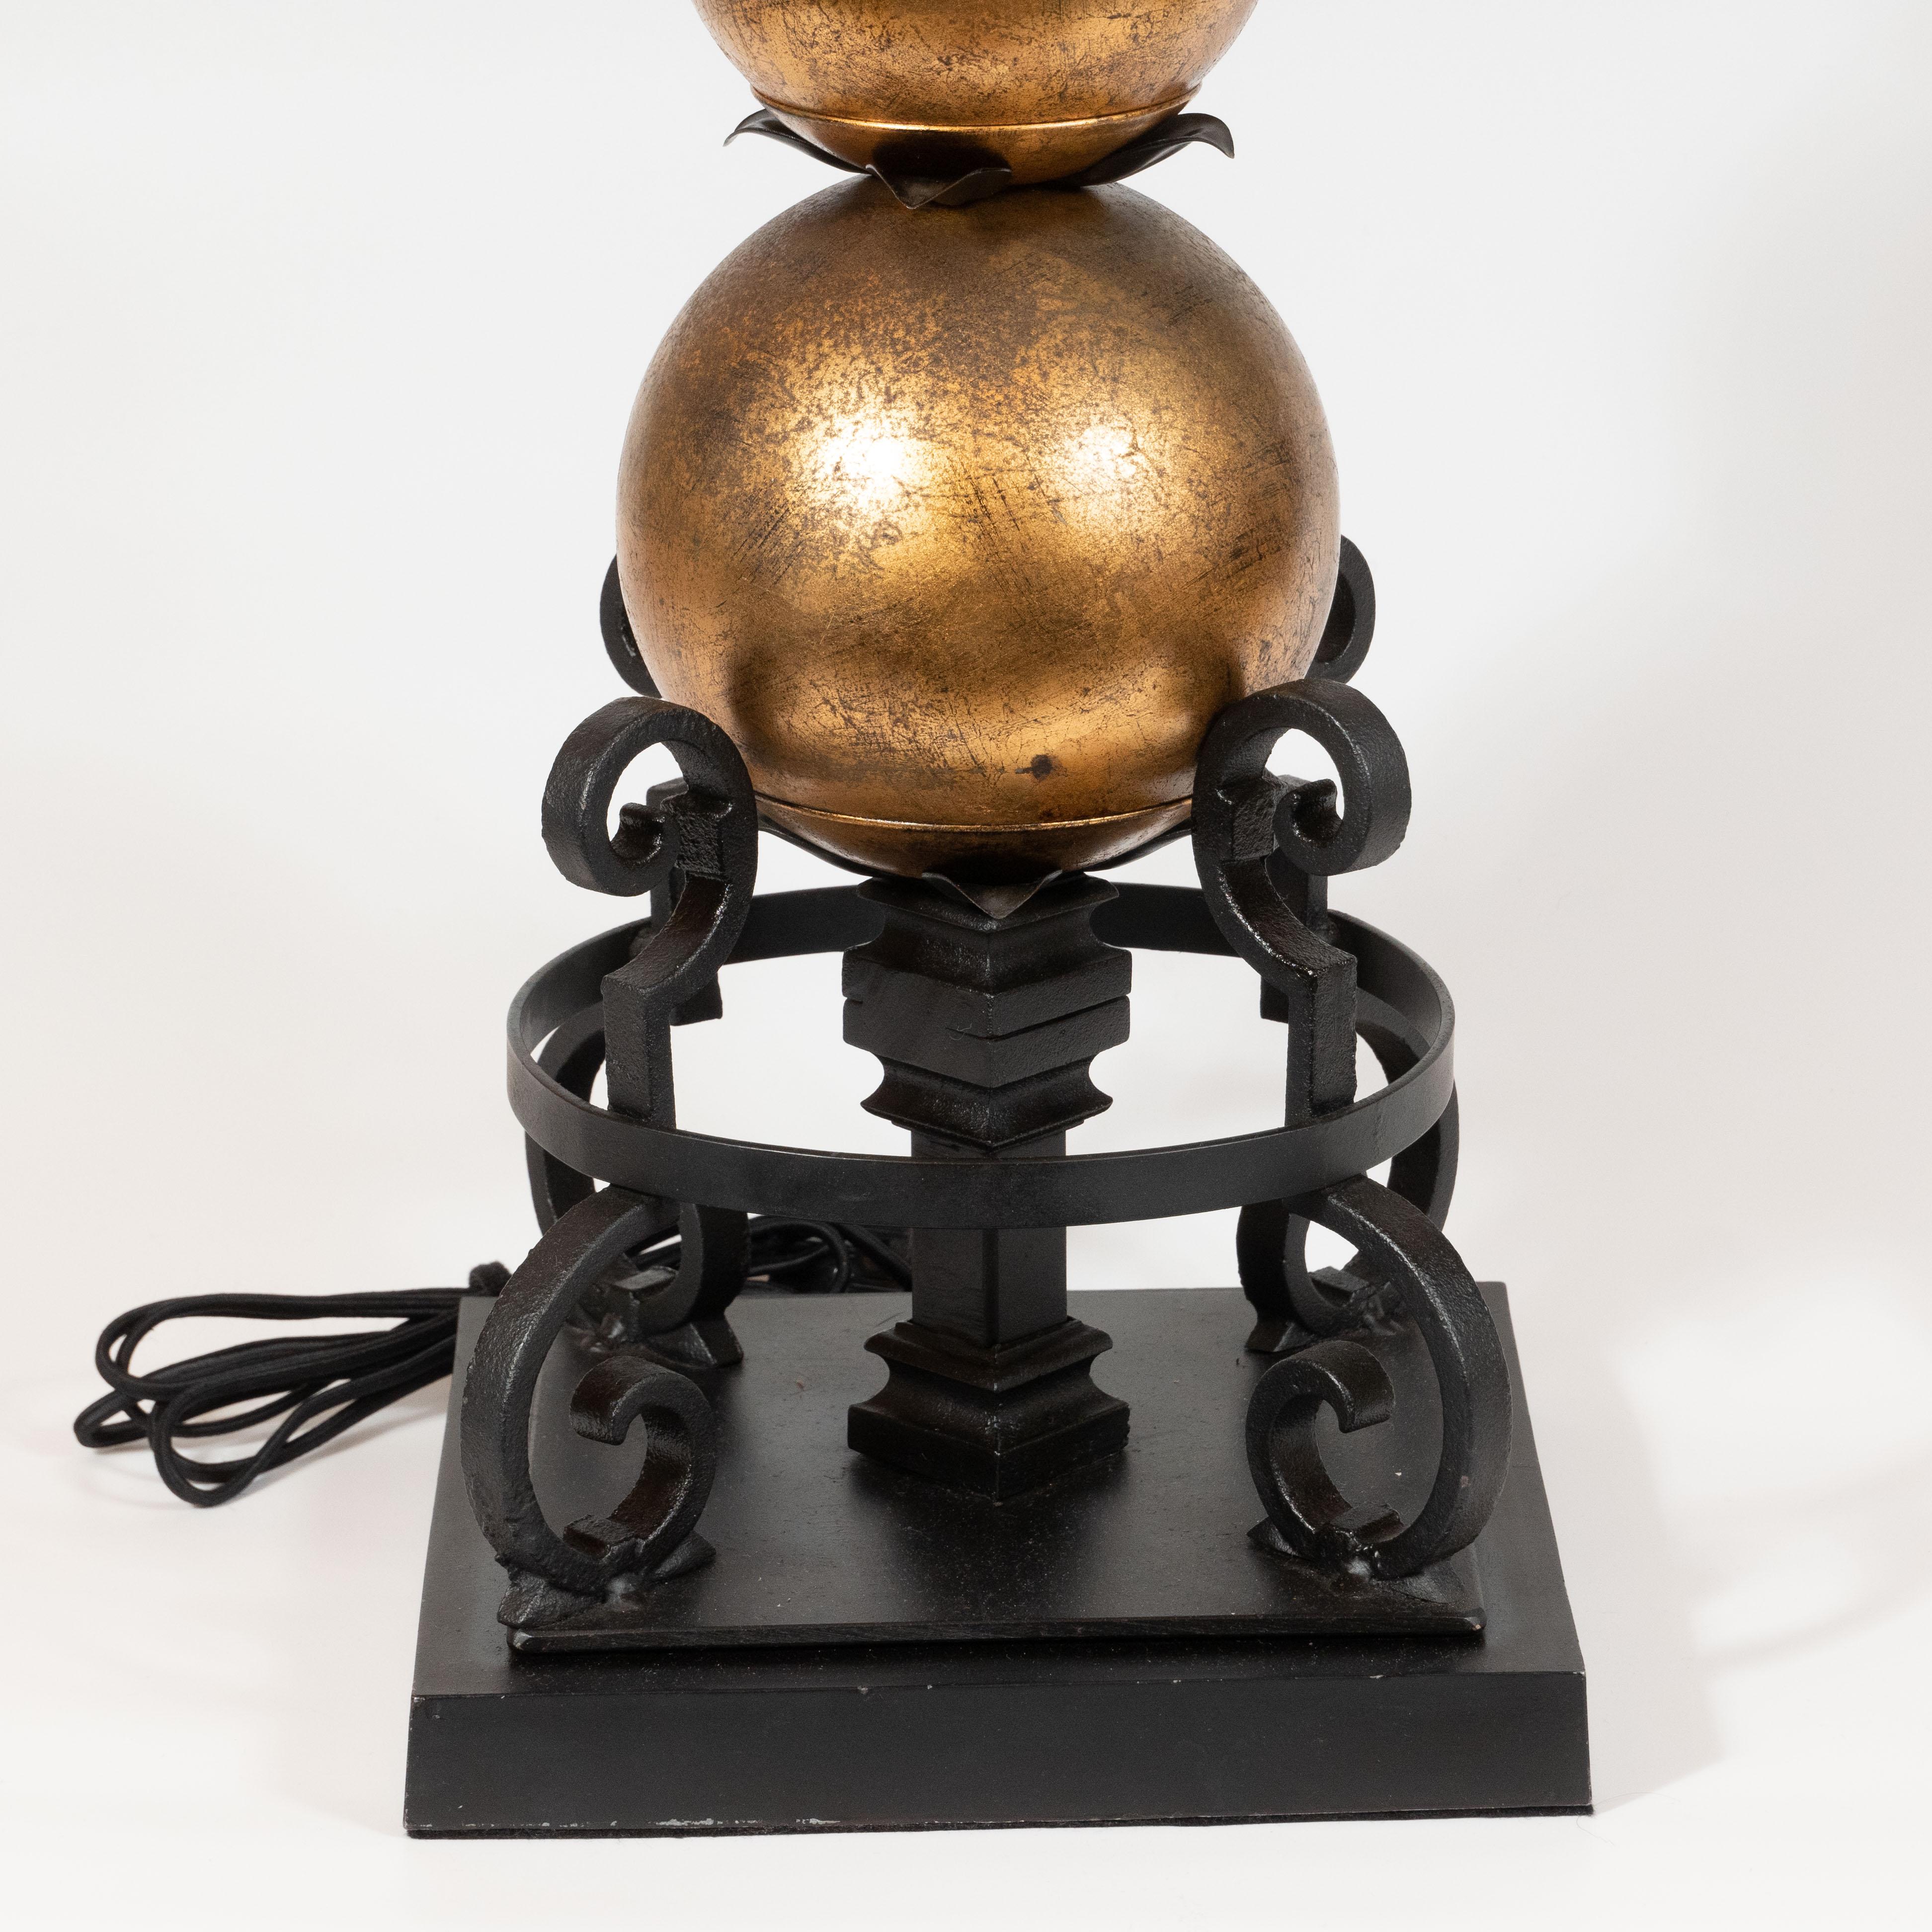 This dramatic and architectural pair of table lamps were realized in France, circa 1940. They feature Edgar Brandt style wrought iron curvilinear embellishments ascending from a square skyscraper style base of the same material. Spherical gilded